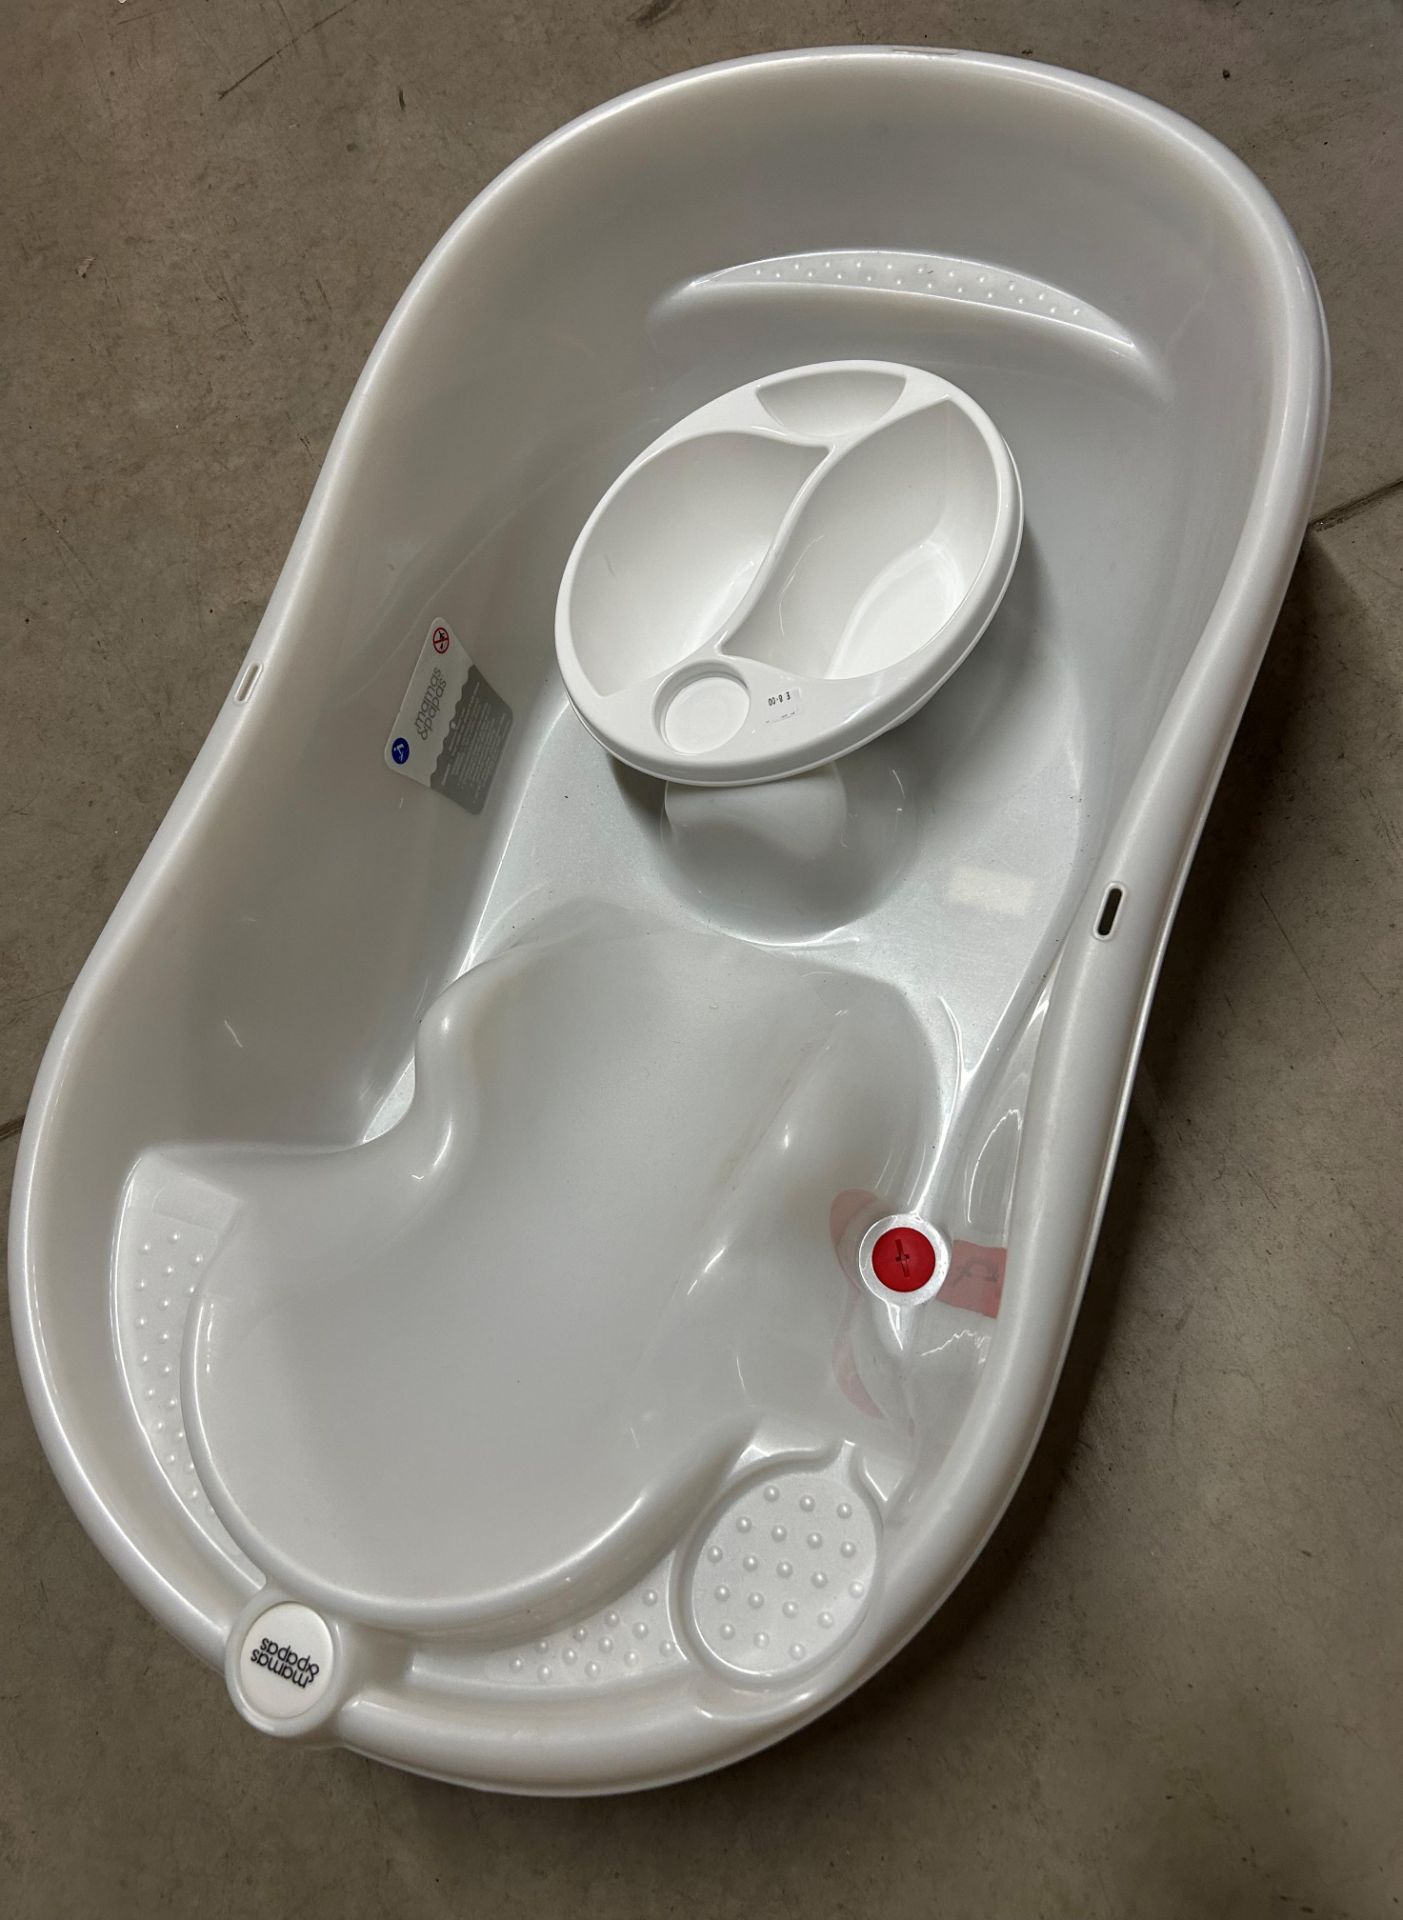 MAMAS AND PAPAS MOULDED SAFETY BABY BATH WITH TOP AND TAIL BOWL NEW UNUSED RRP £38 (Saleroom